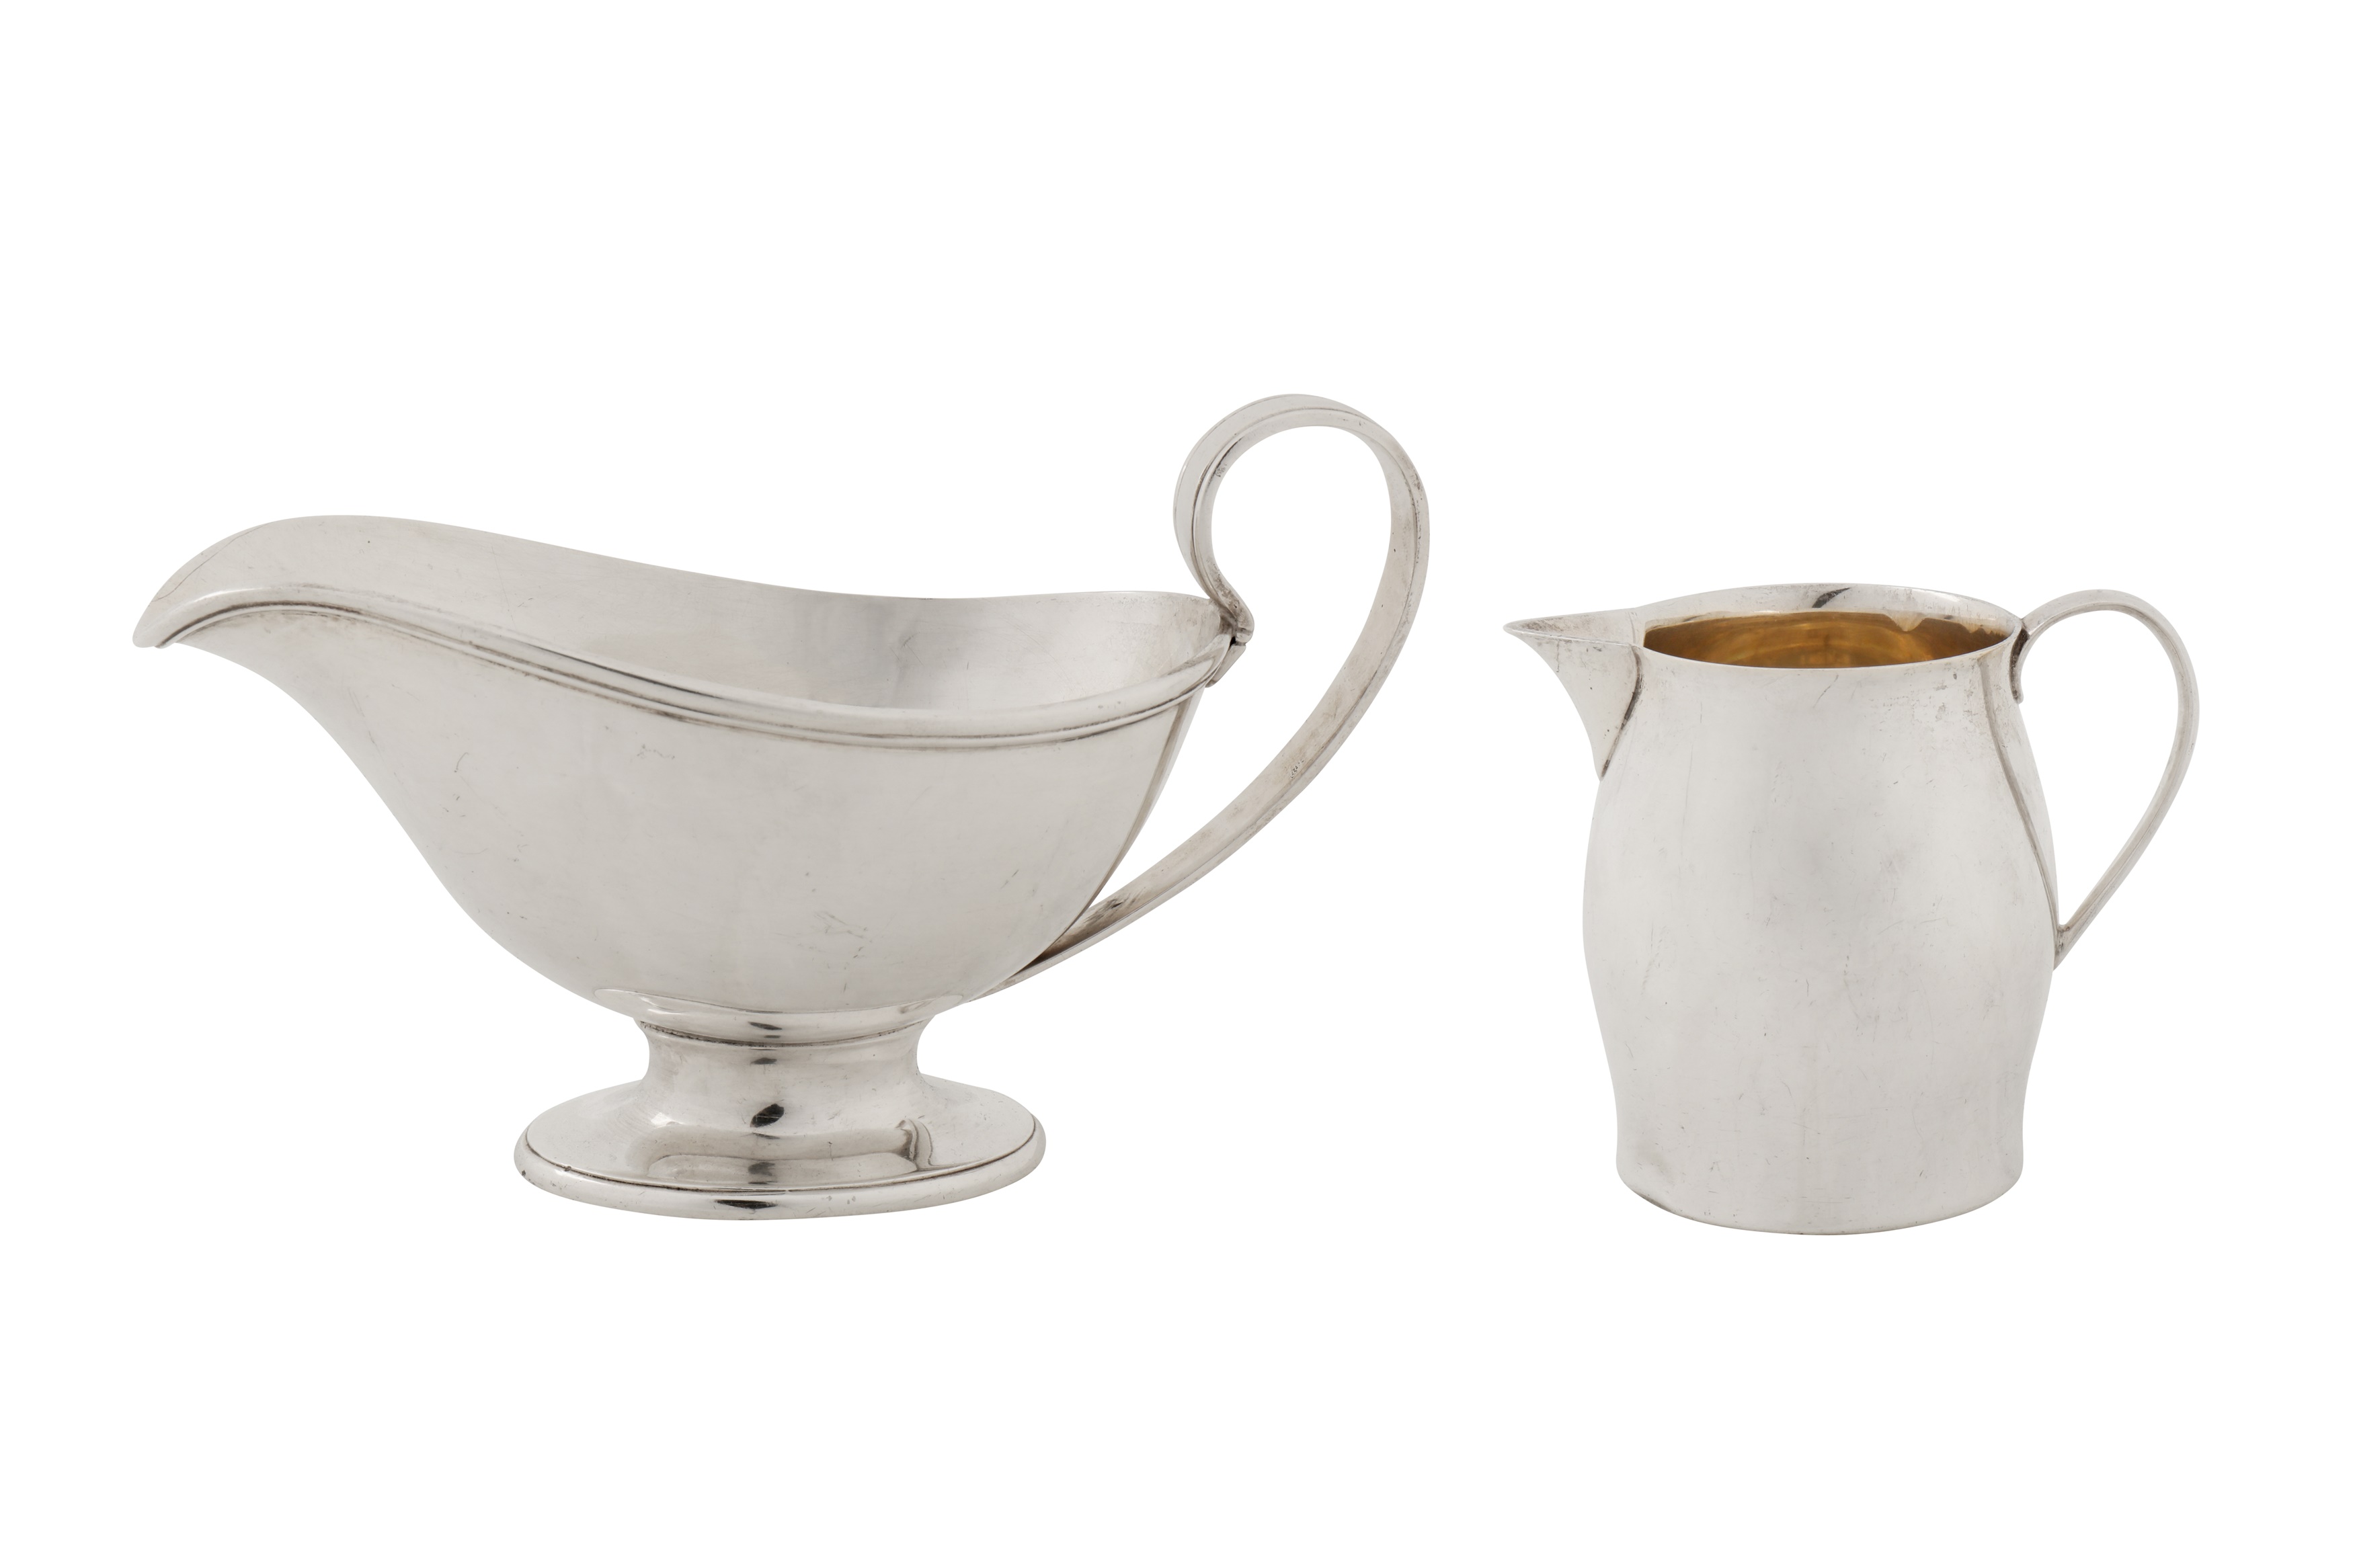 A mid-20th century American sterling silver sauce boat, New York circa 1970 by Tiffany - Image 2 of 6